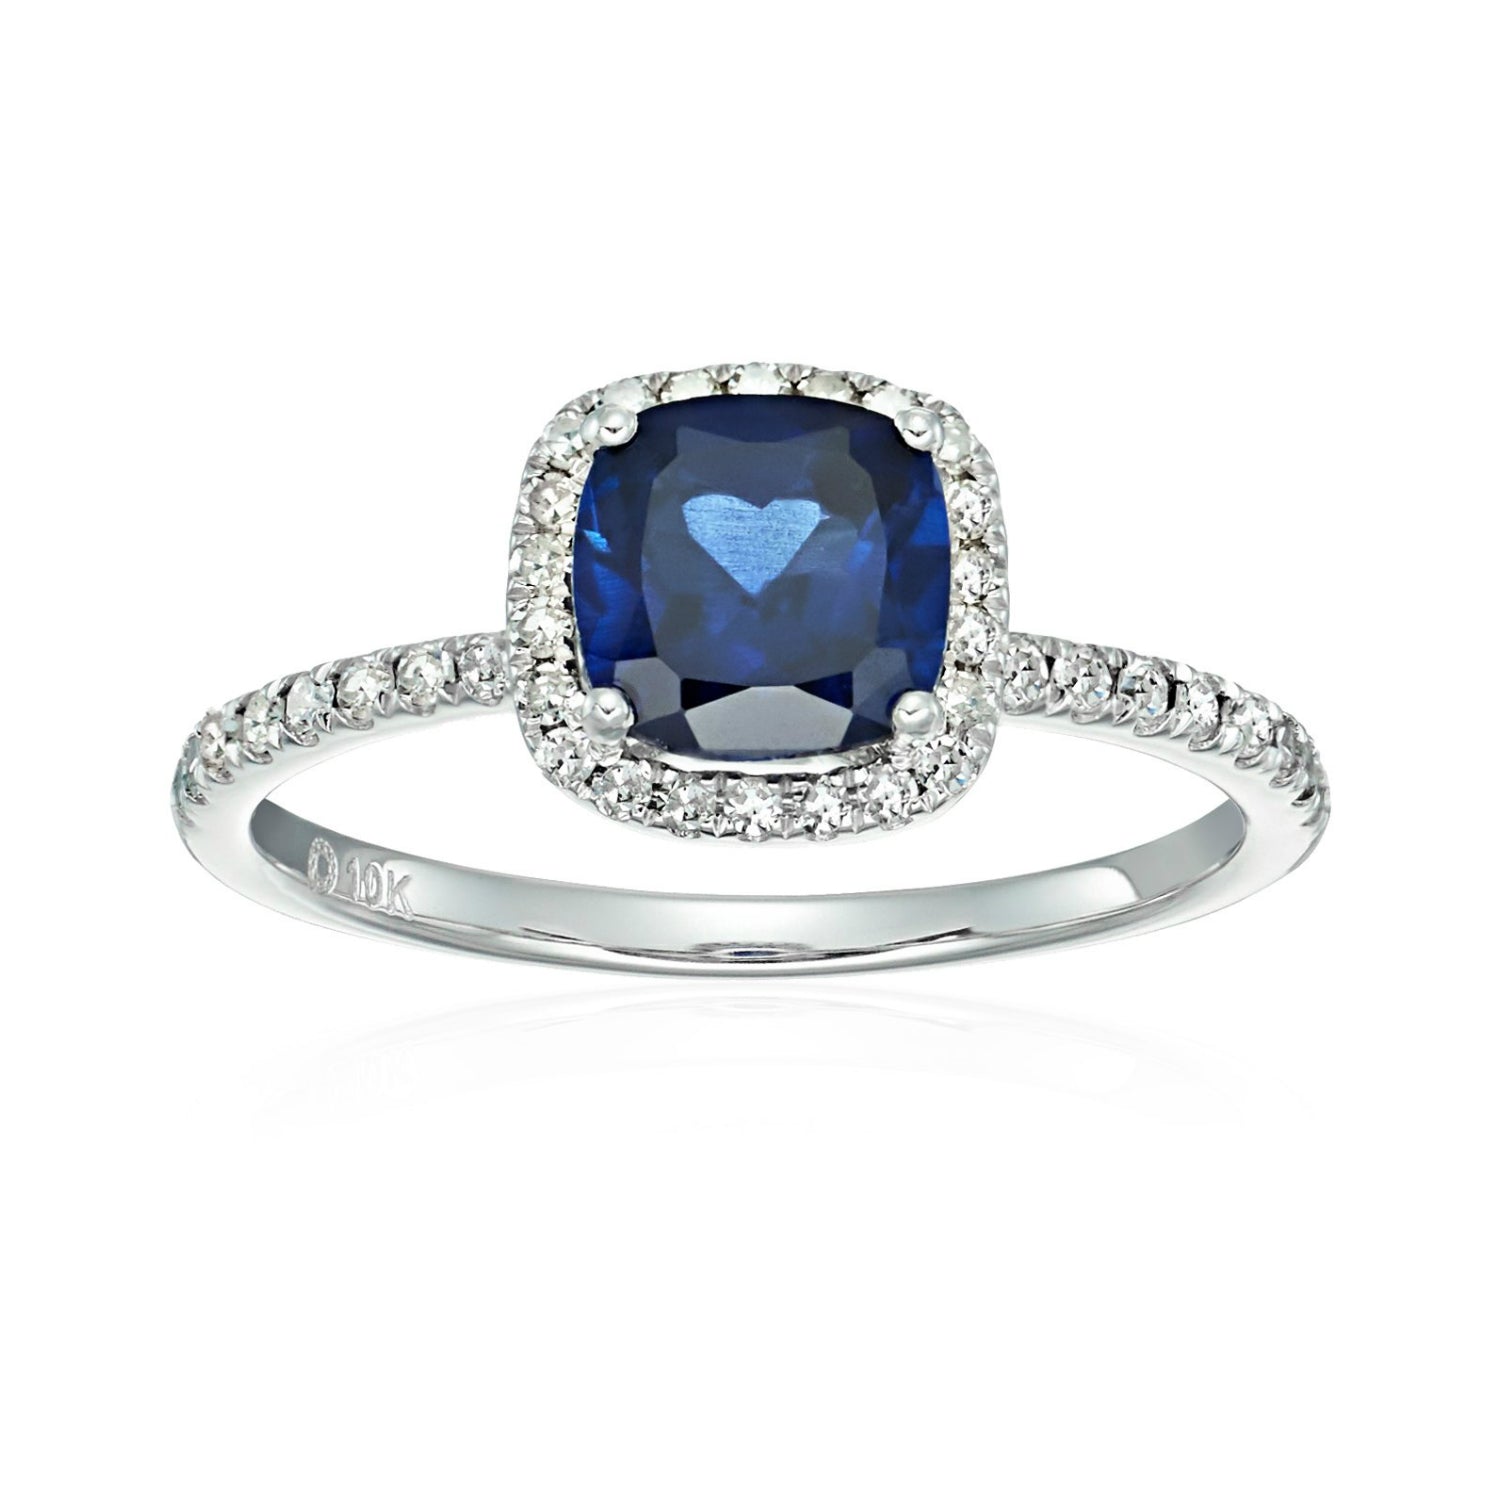 10k White Gold Created Blue Sapphire and Diamond Cushion Engagement Ring (1/4cttw, H-I Color, I1-I2 Clarity), - pinctore